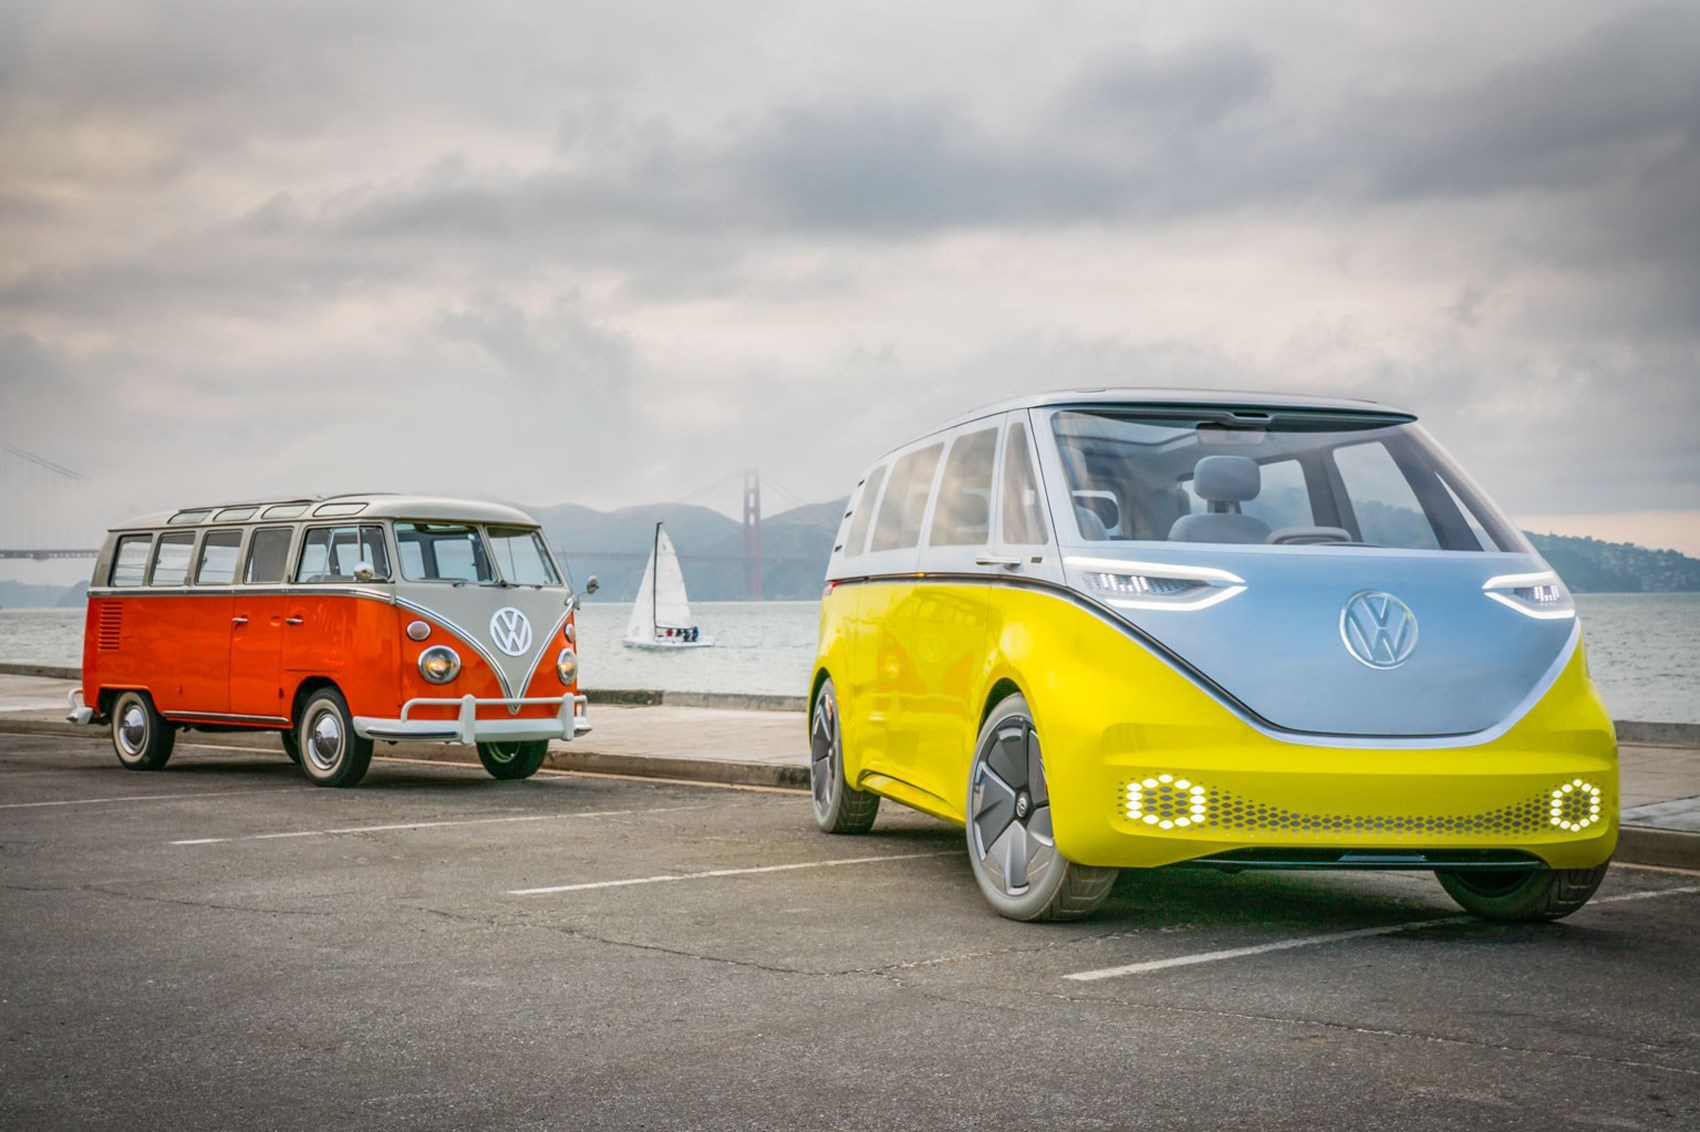 Transporter, Bus, Kombi: Whatever You Call It, VW's Van Is Celebrating 70  Years of Production